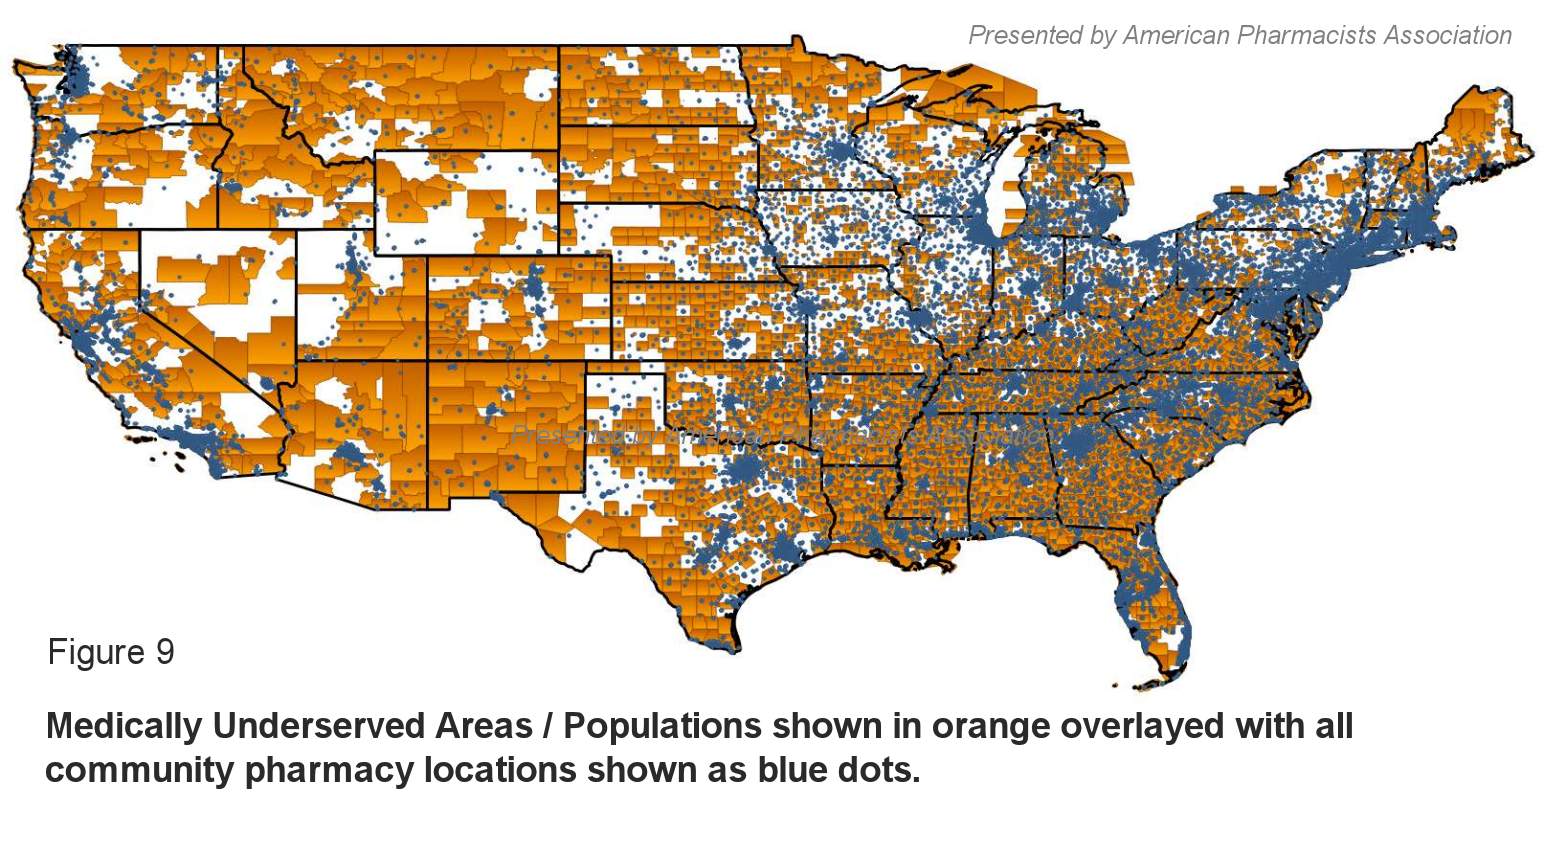 Figure 9: Medically Underserved Areas / Populations shown in orange overlayed with all community pharmacy locations shown as blue dots.